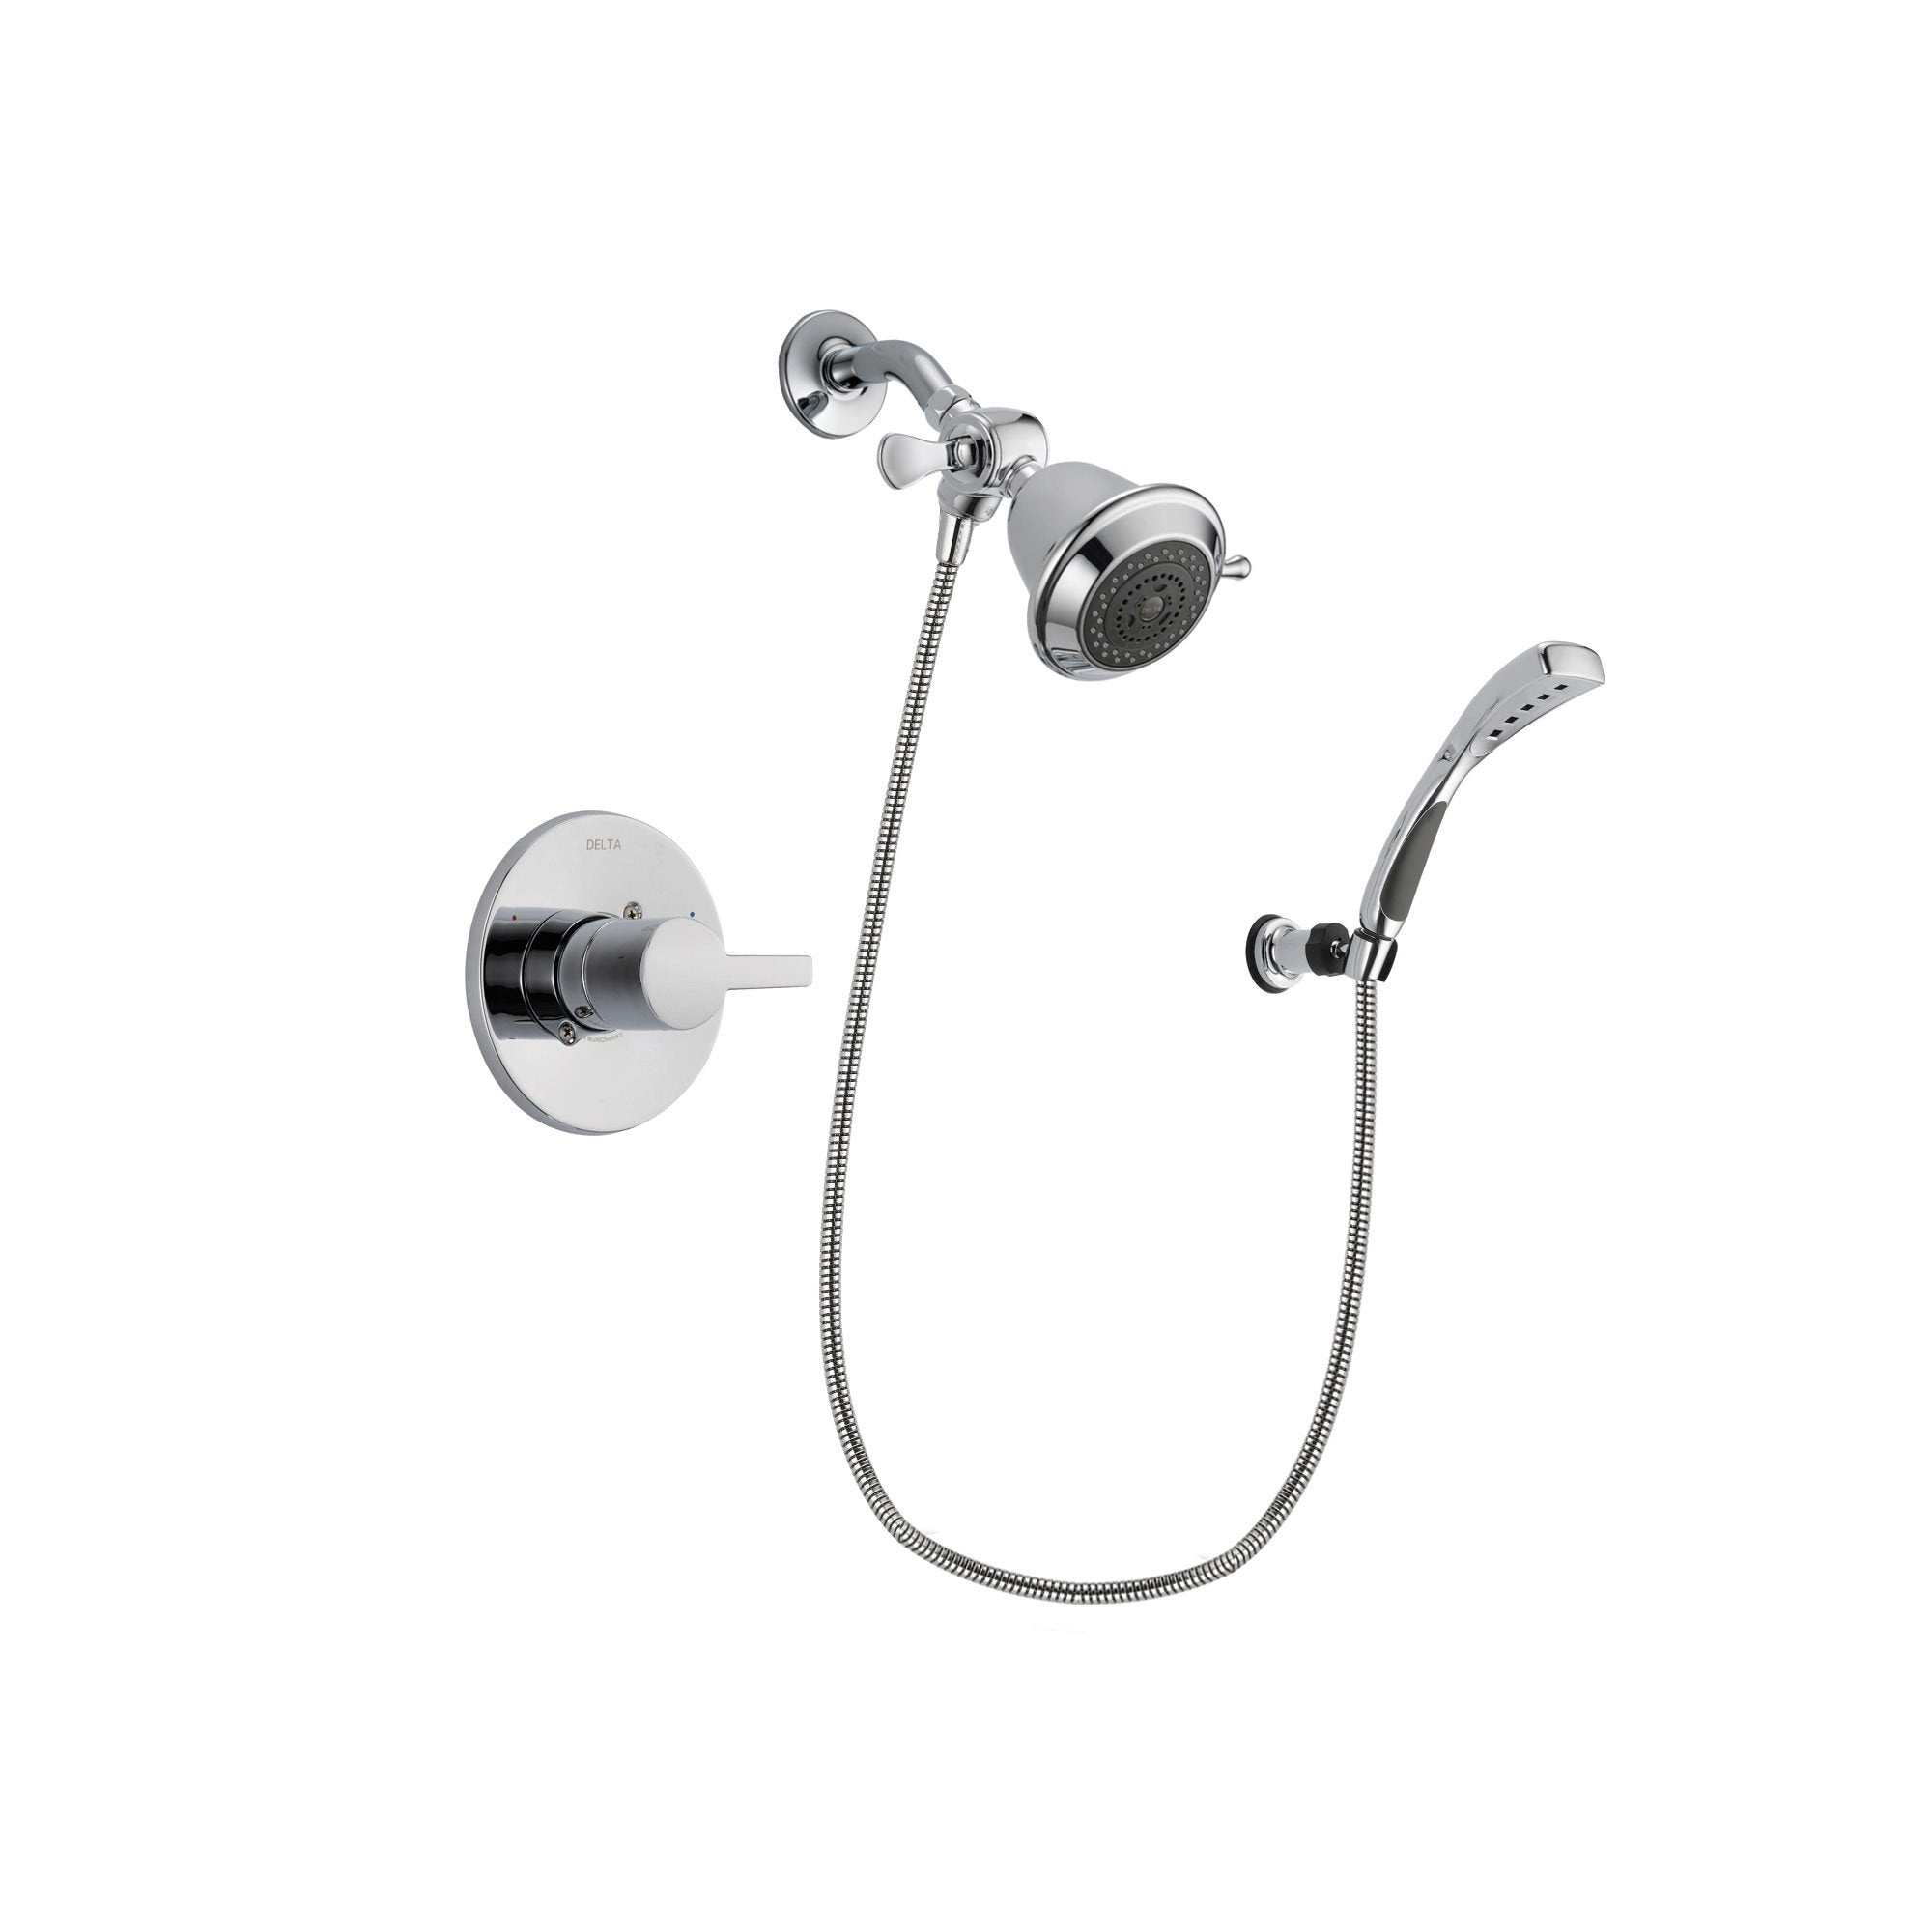 Delta Compel Chrome Finish Shower Faucet System Package with Shower Head and Wall-Mount Bracket with Handheld Shower Spray Includes Rough-in Valve DSP0984V